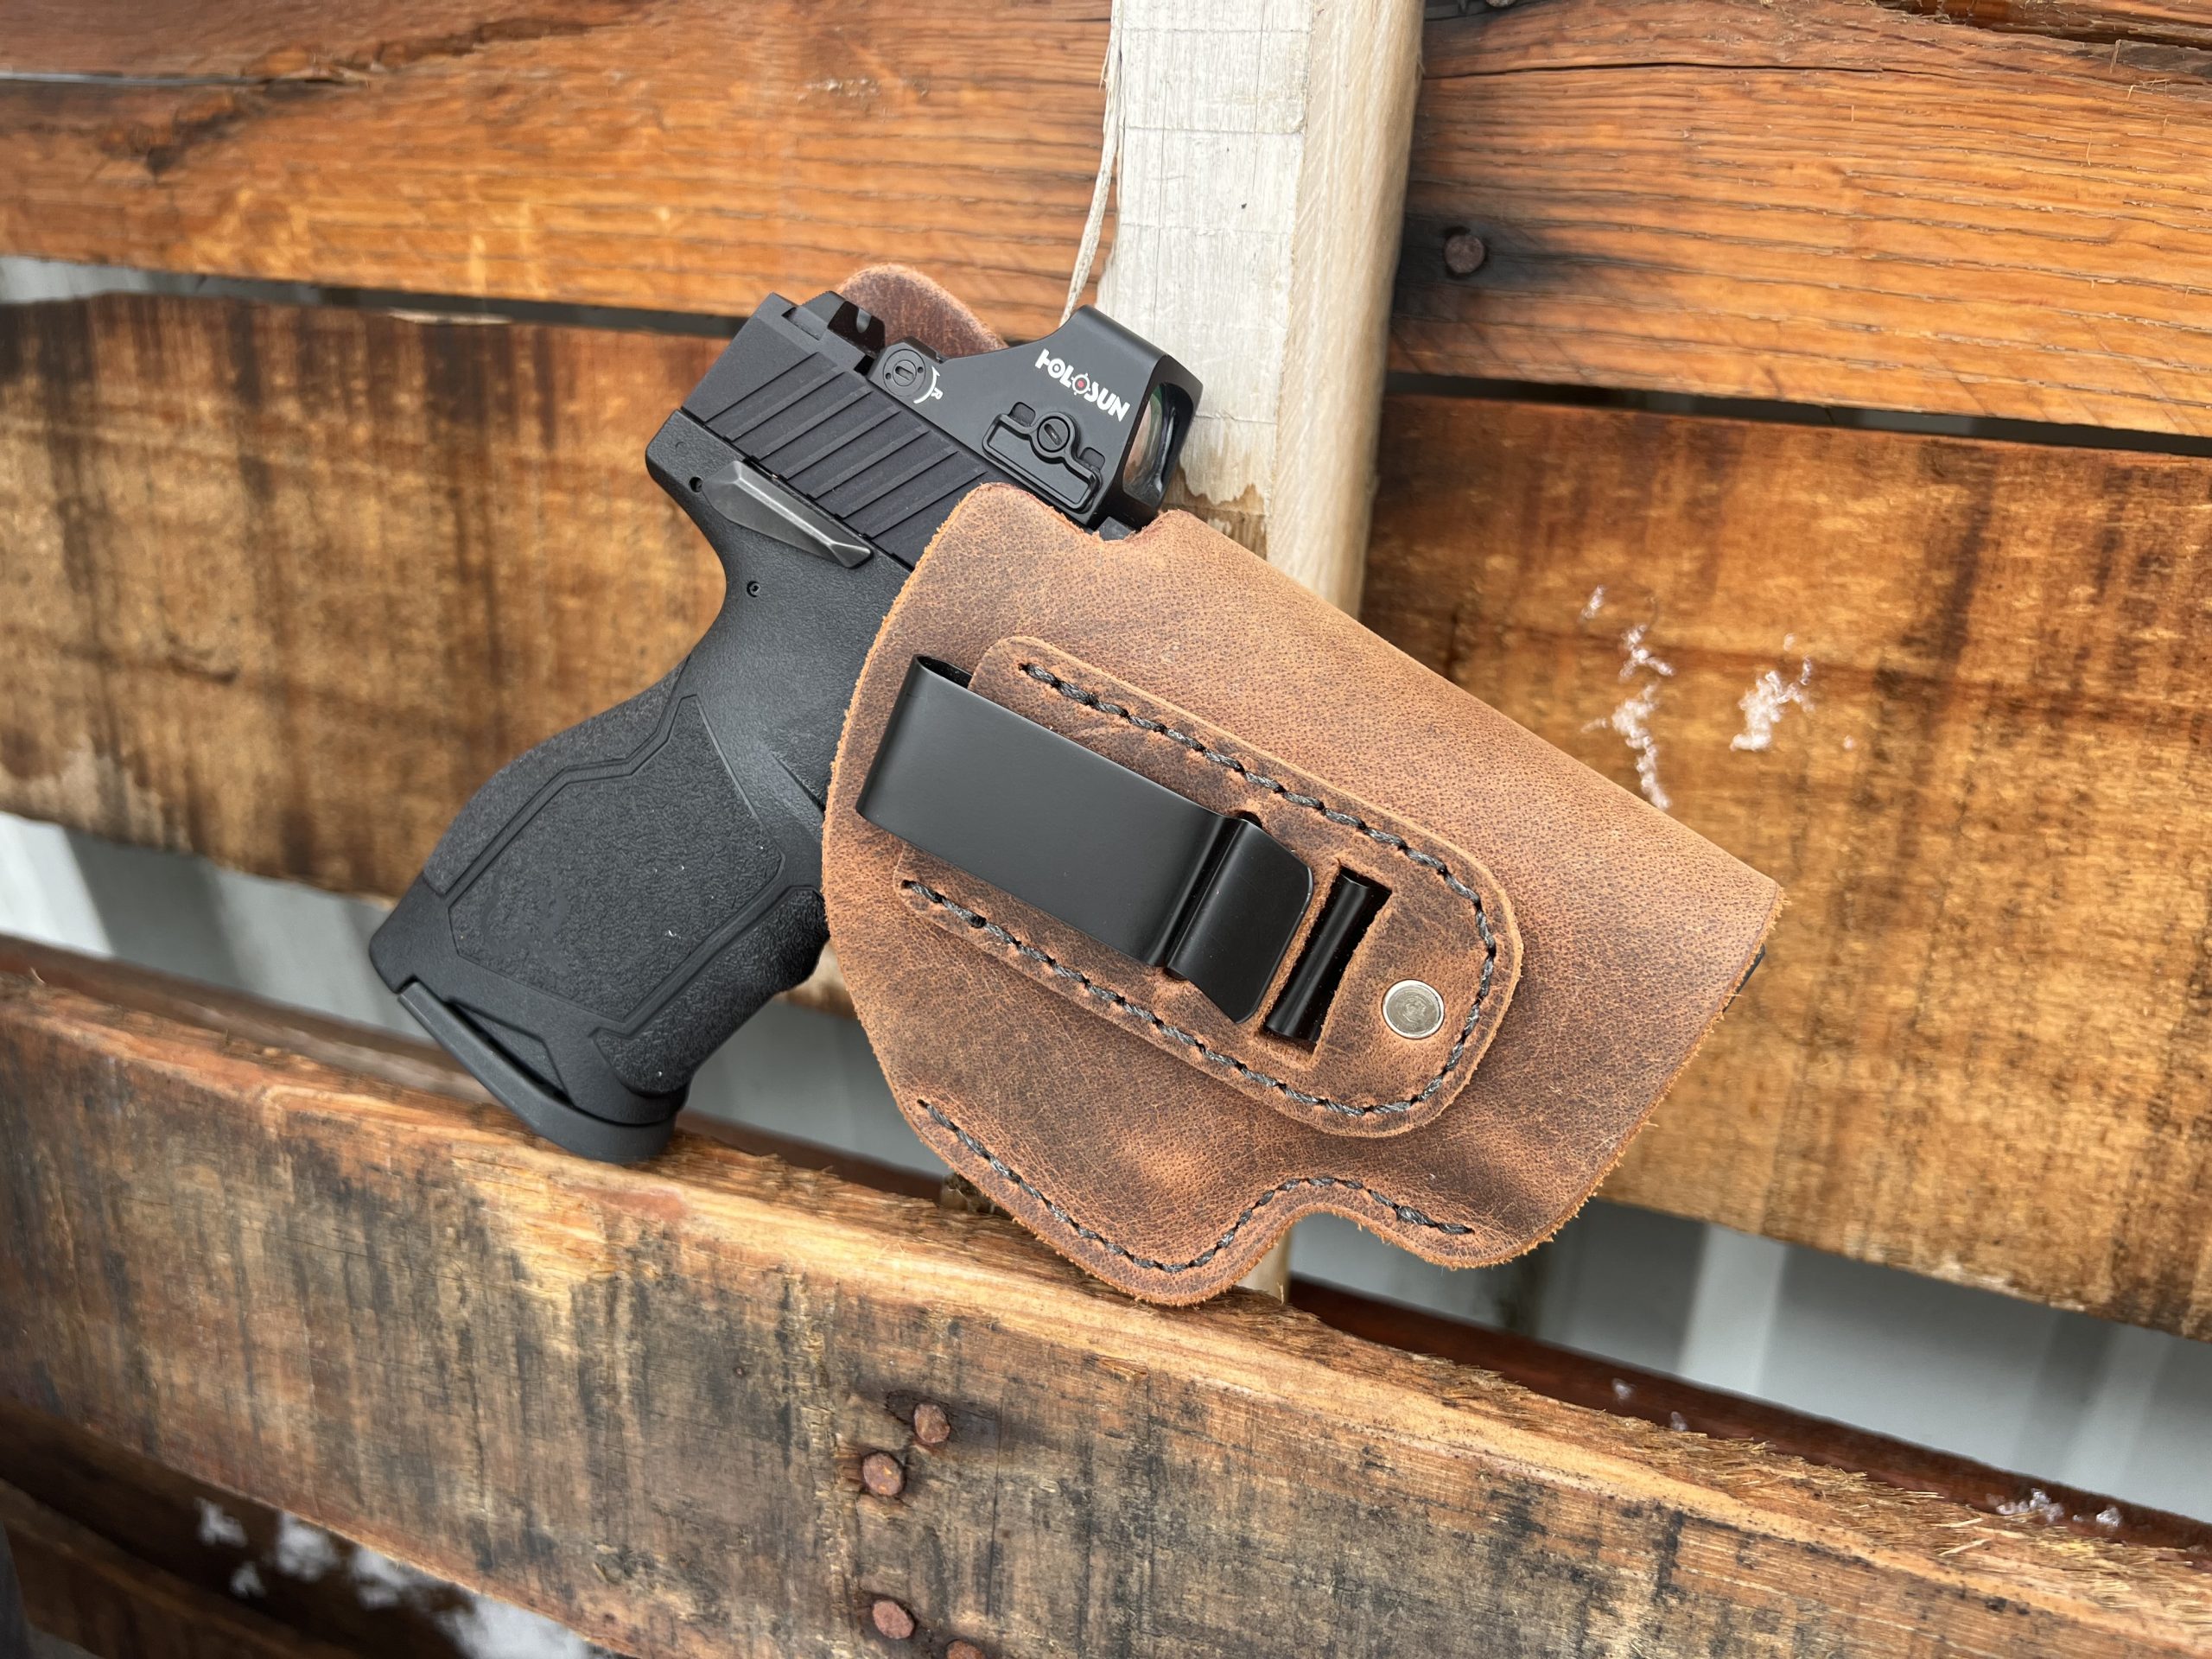 Taurus TX22 Compact Holster - IWB Leather Holster